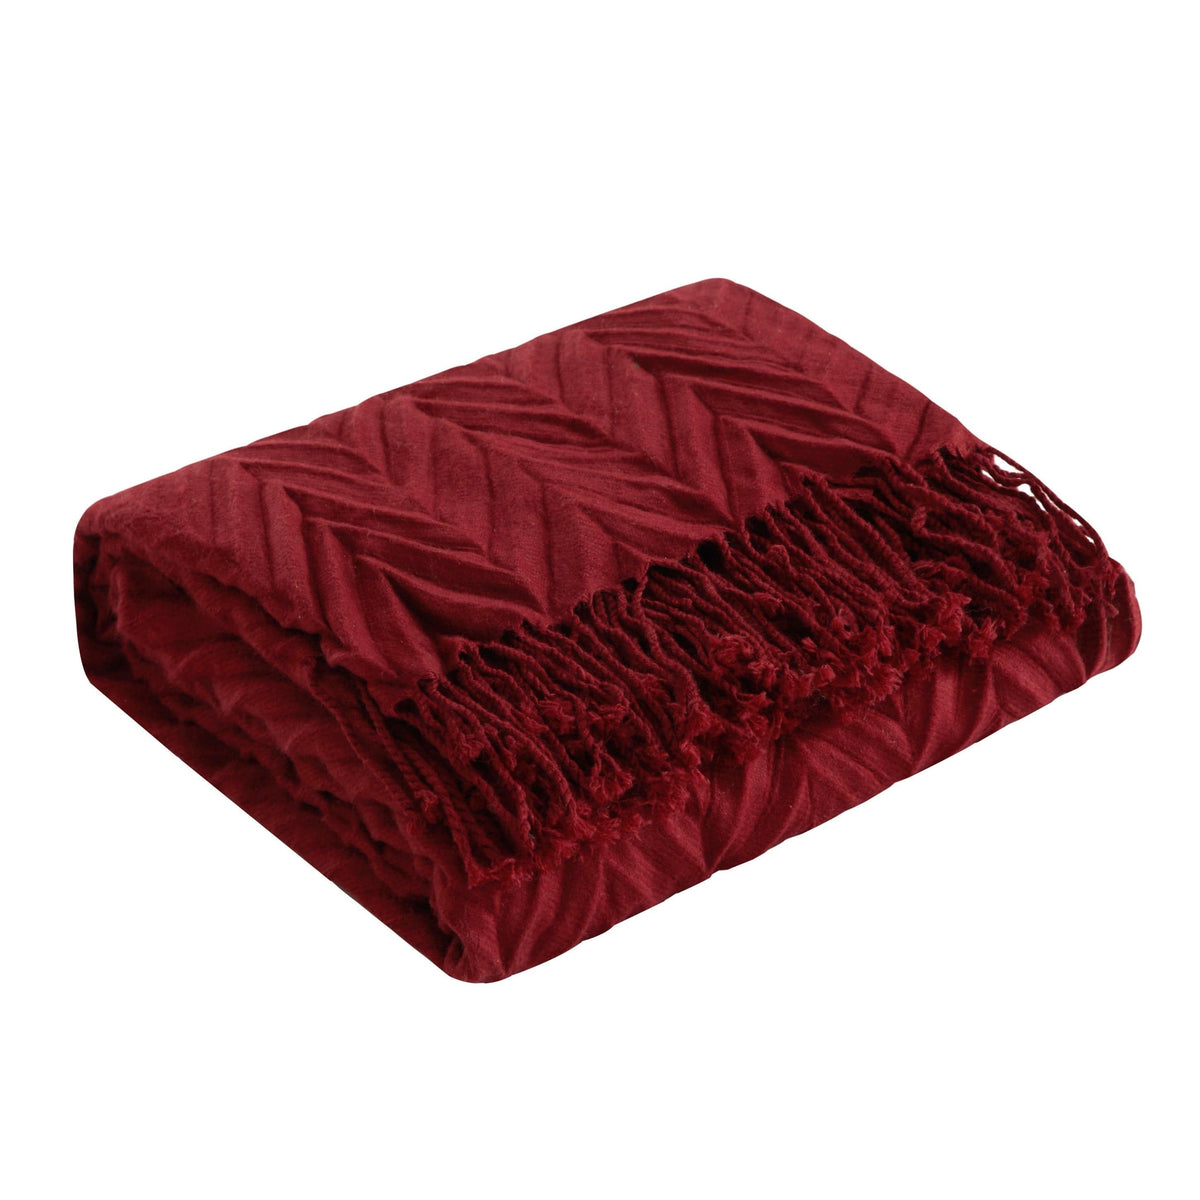 NY&C Home Foremost Ruched Throw Blanket 